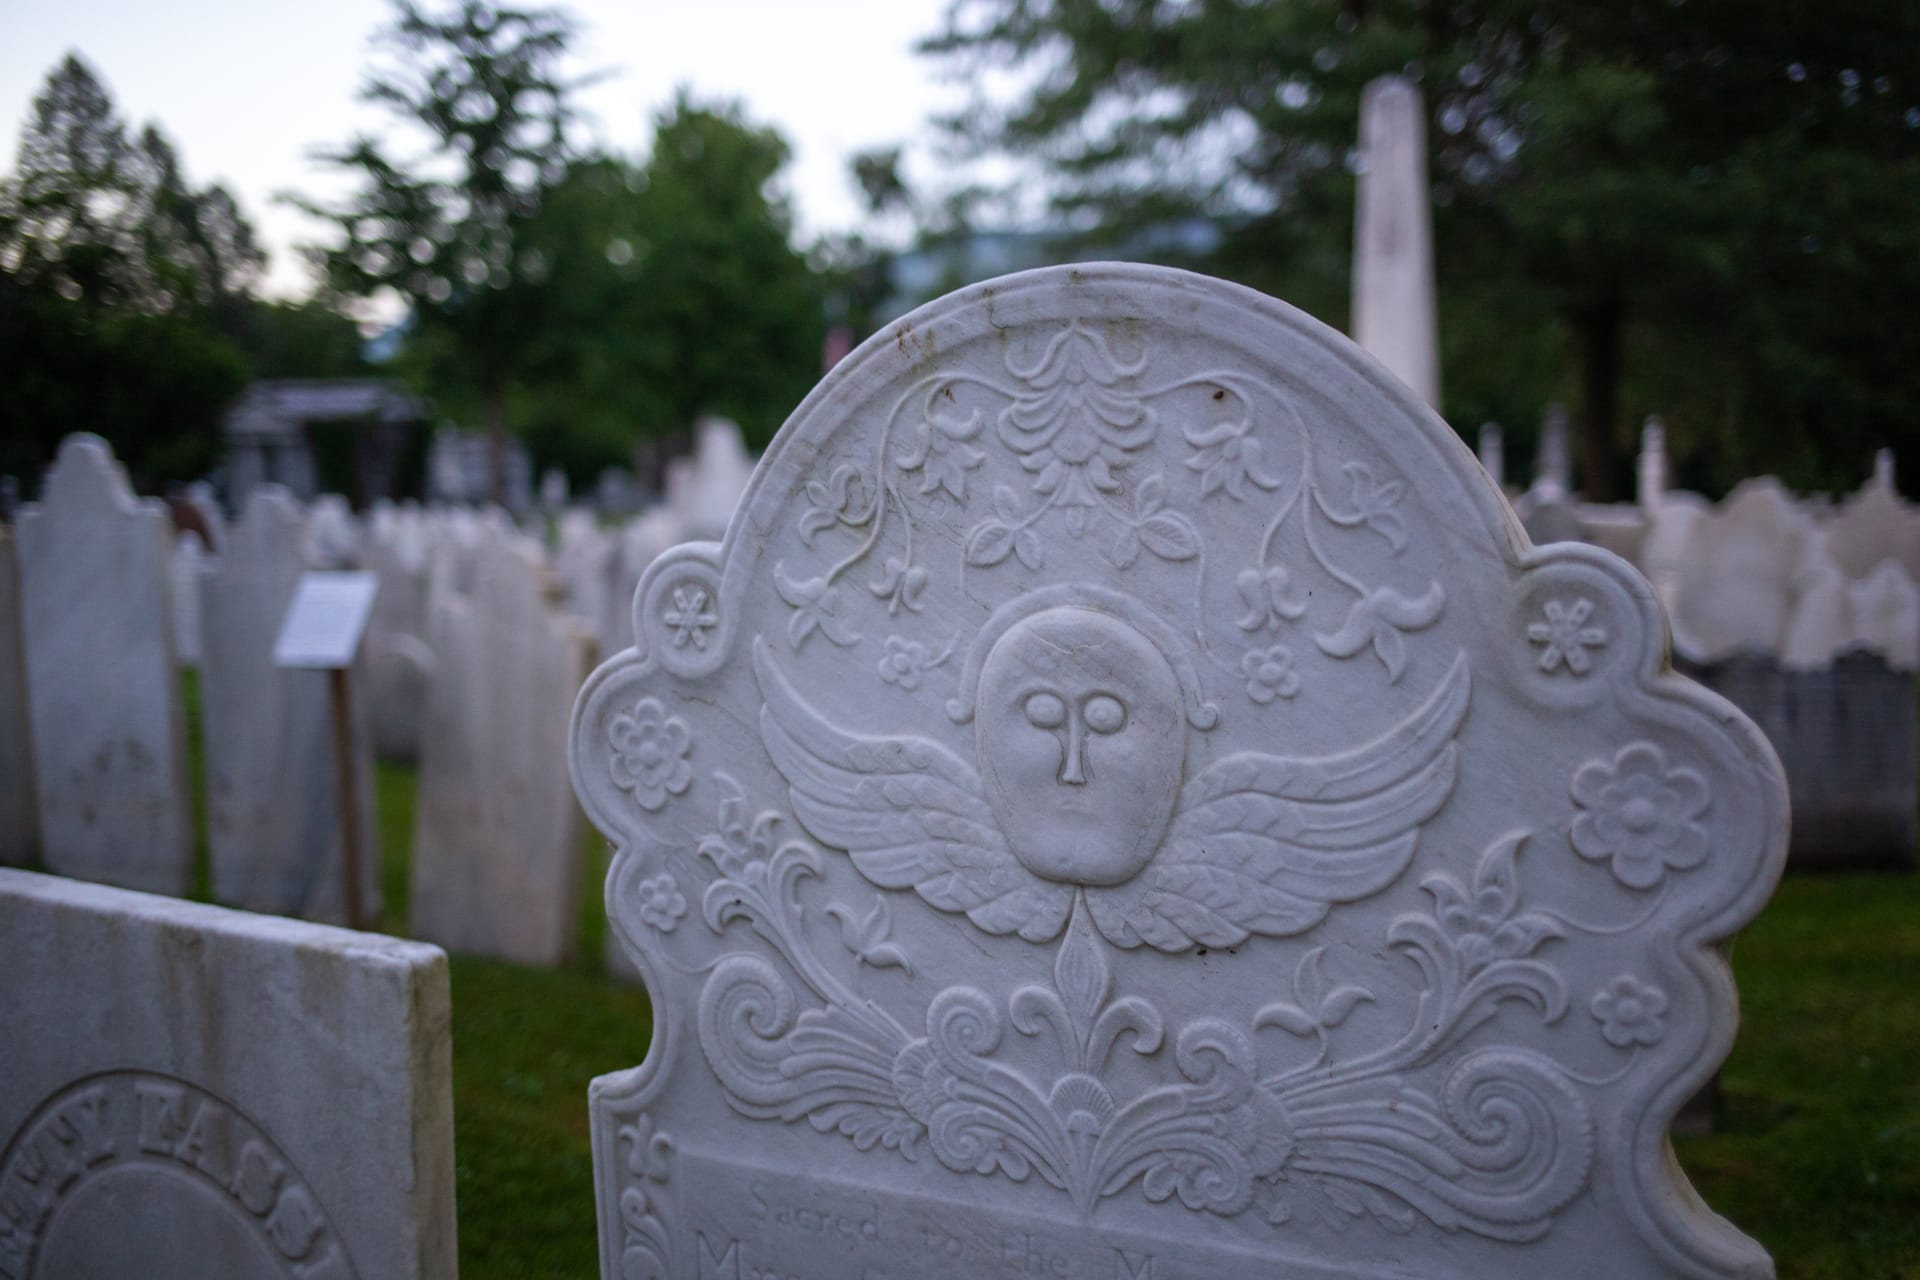 Visit more cemeteries with interesting graves and tombstones